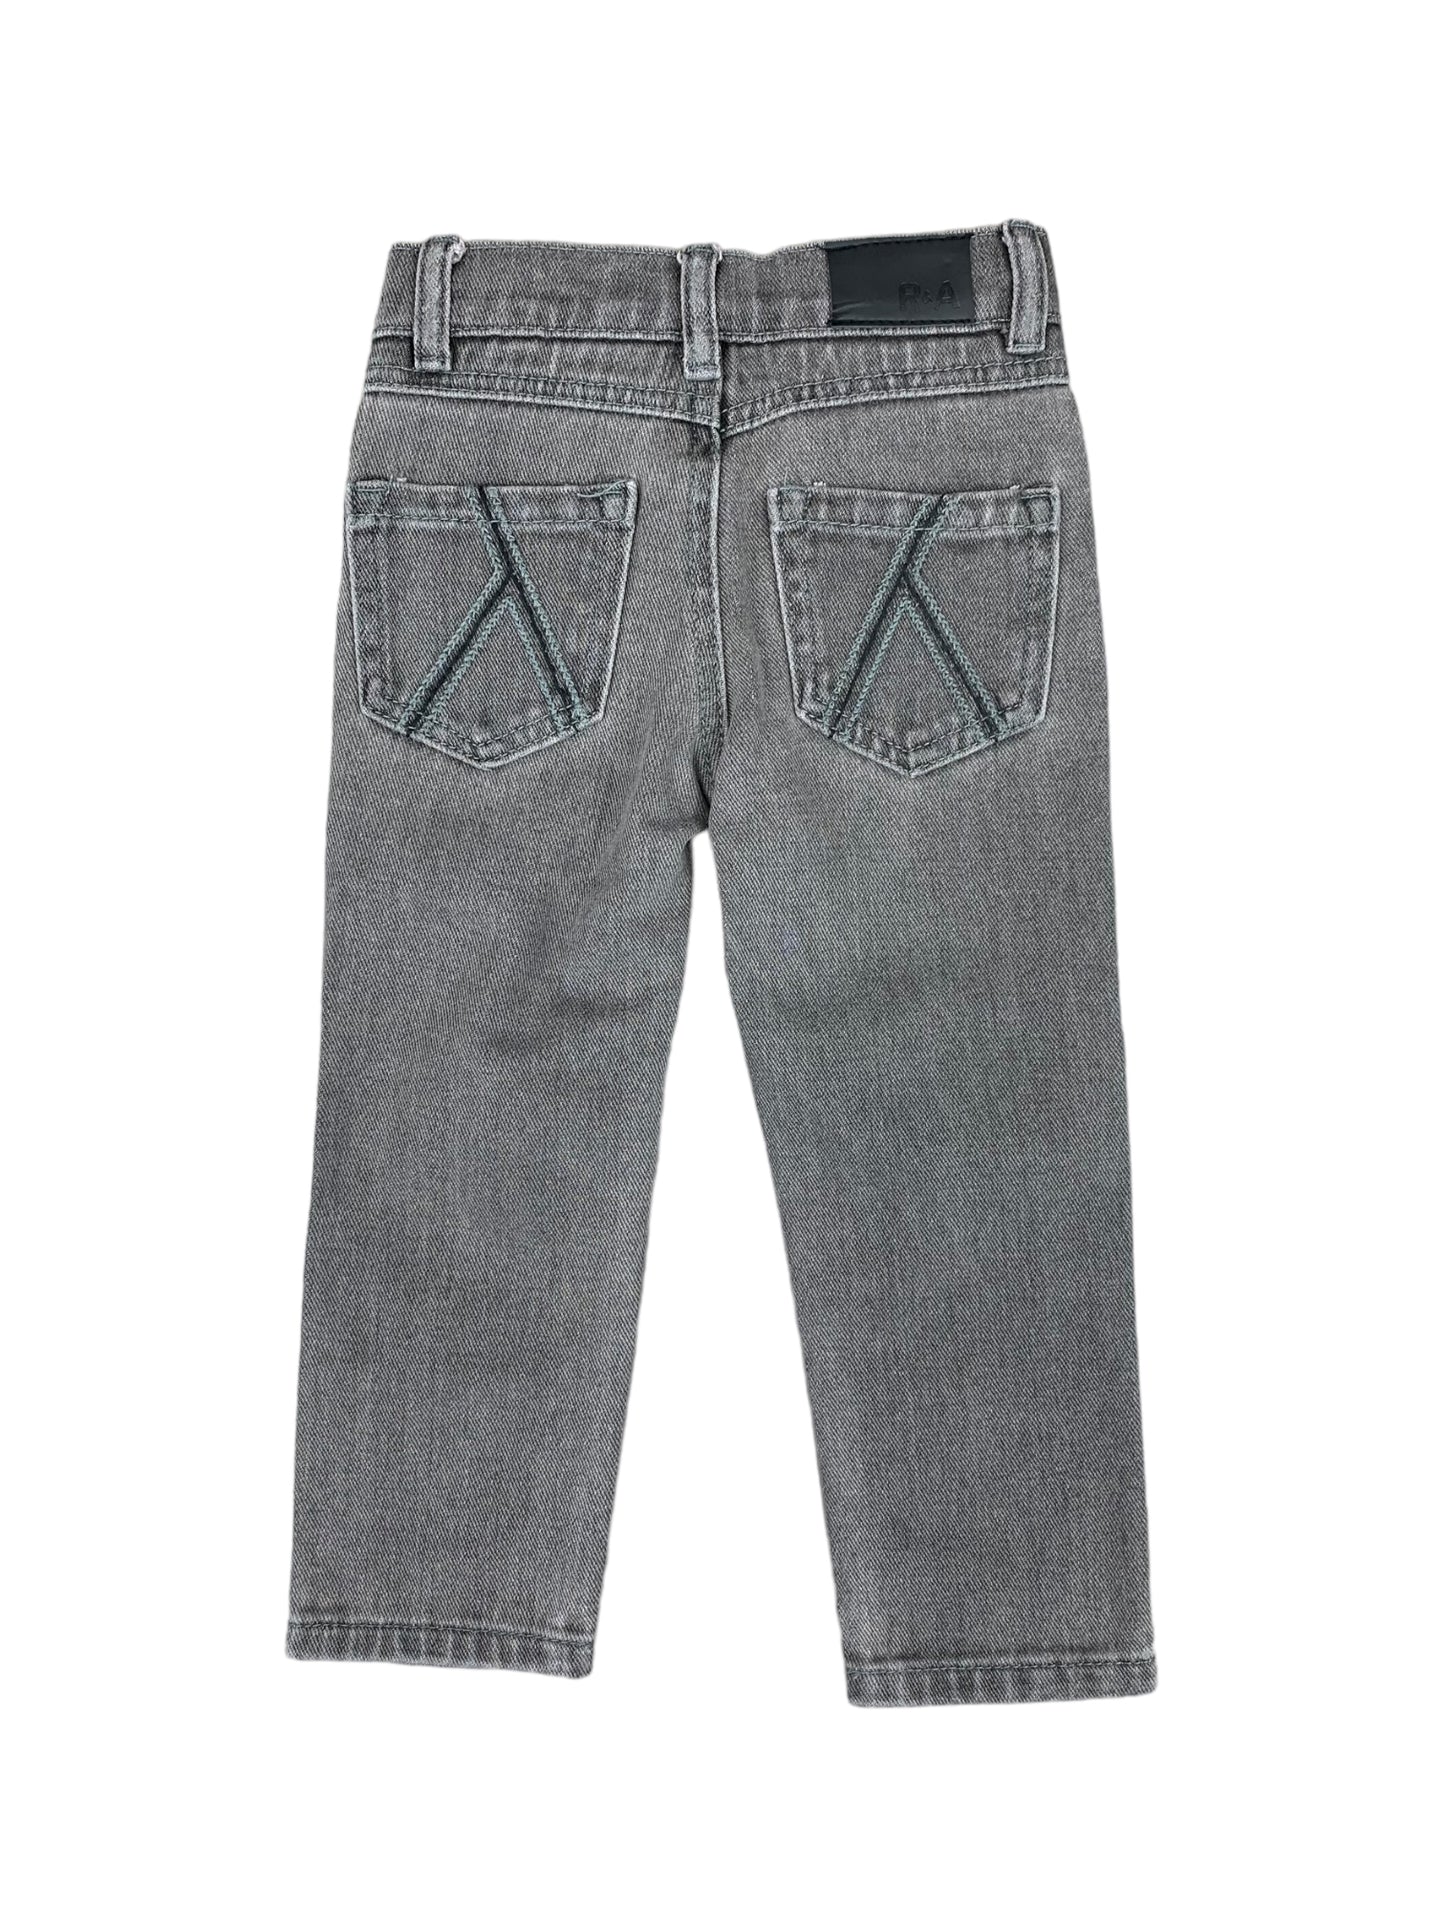 Gray jeans Romy&Aksel for boys 2 to 8 years